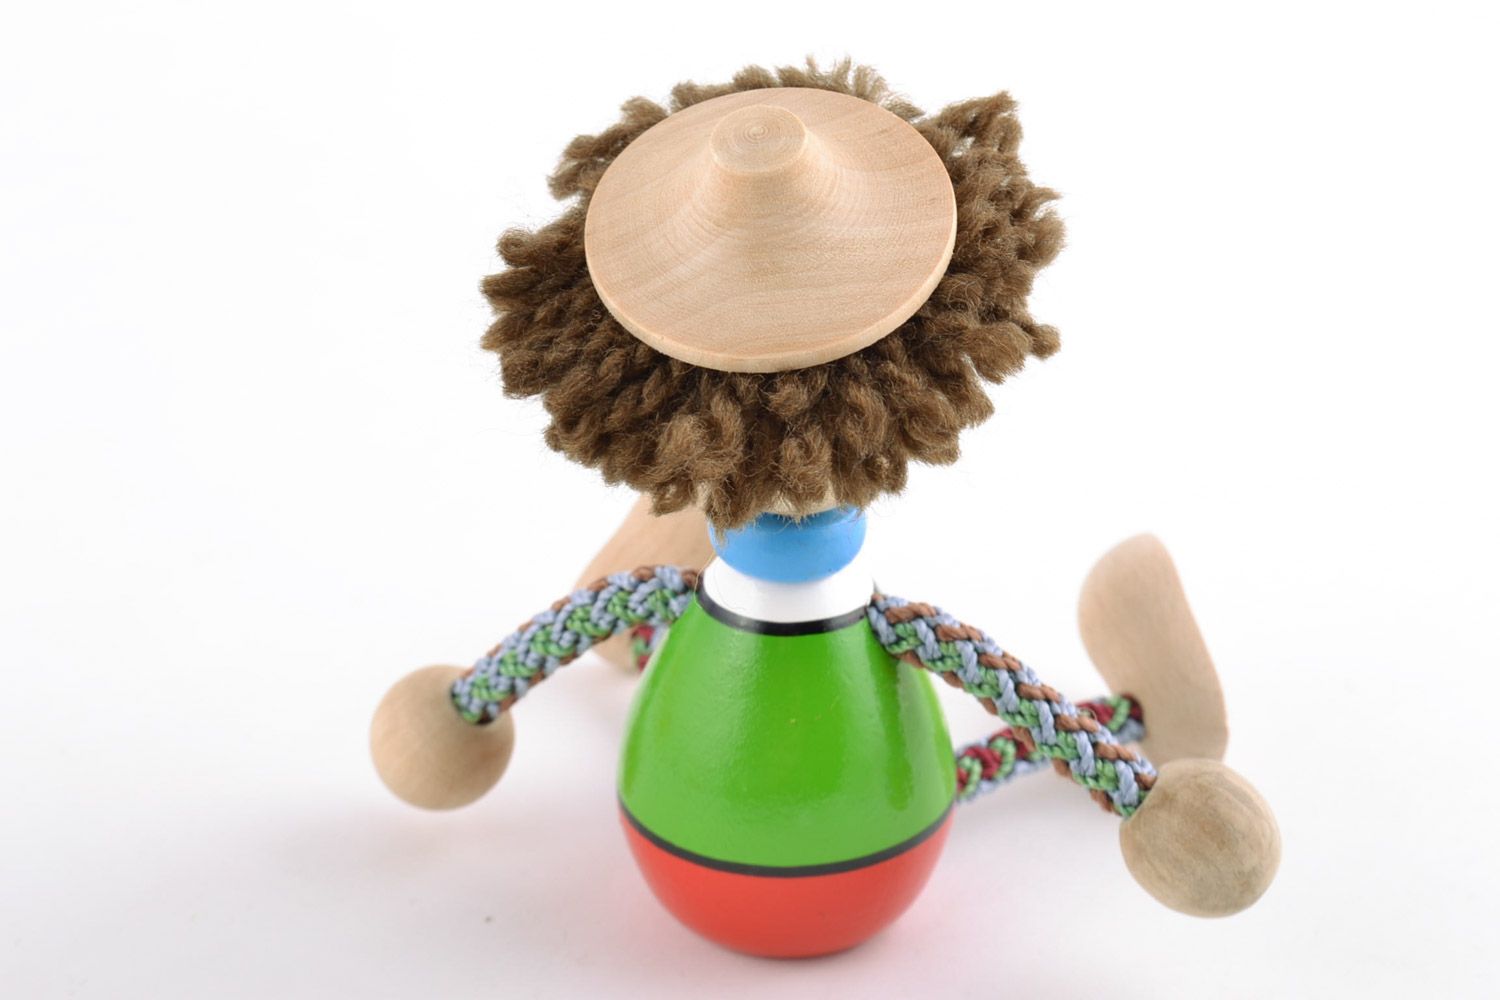 Brightly painted homemade wooden eco toy boy with hat for children and interior photo 5